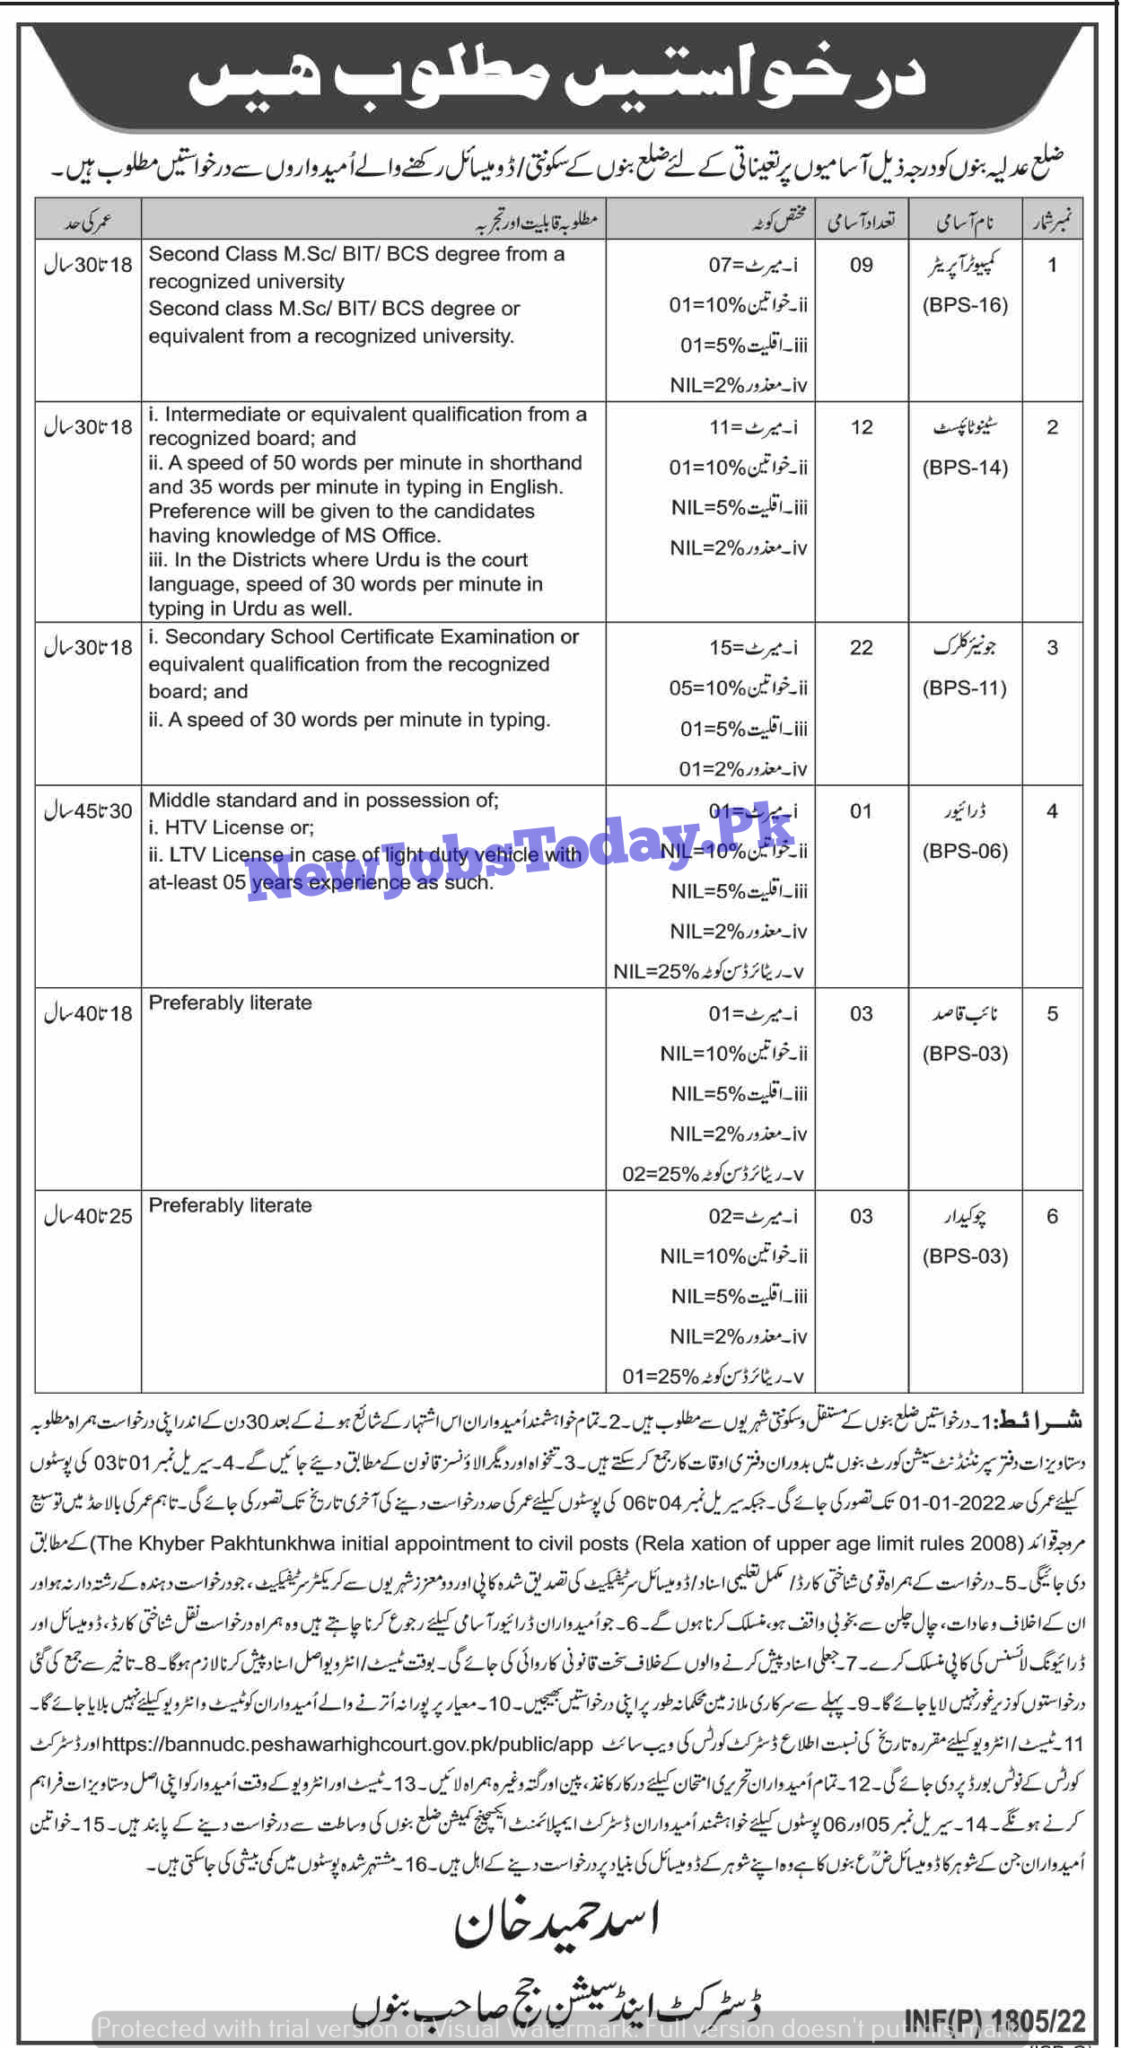 district-session-court-bannu-jobs-2022